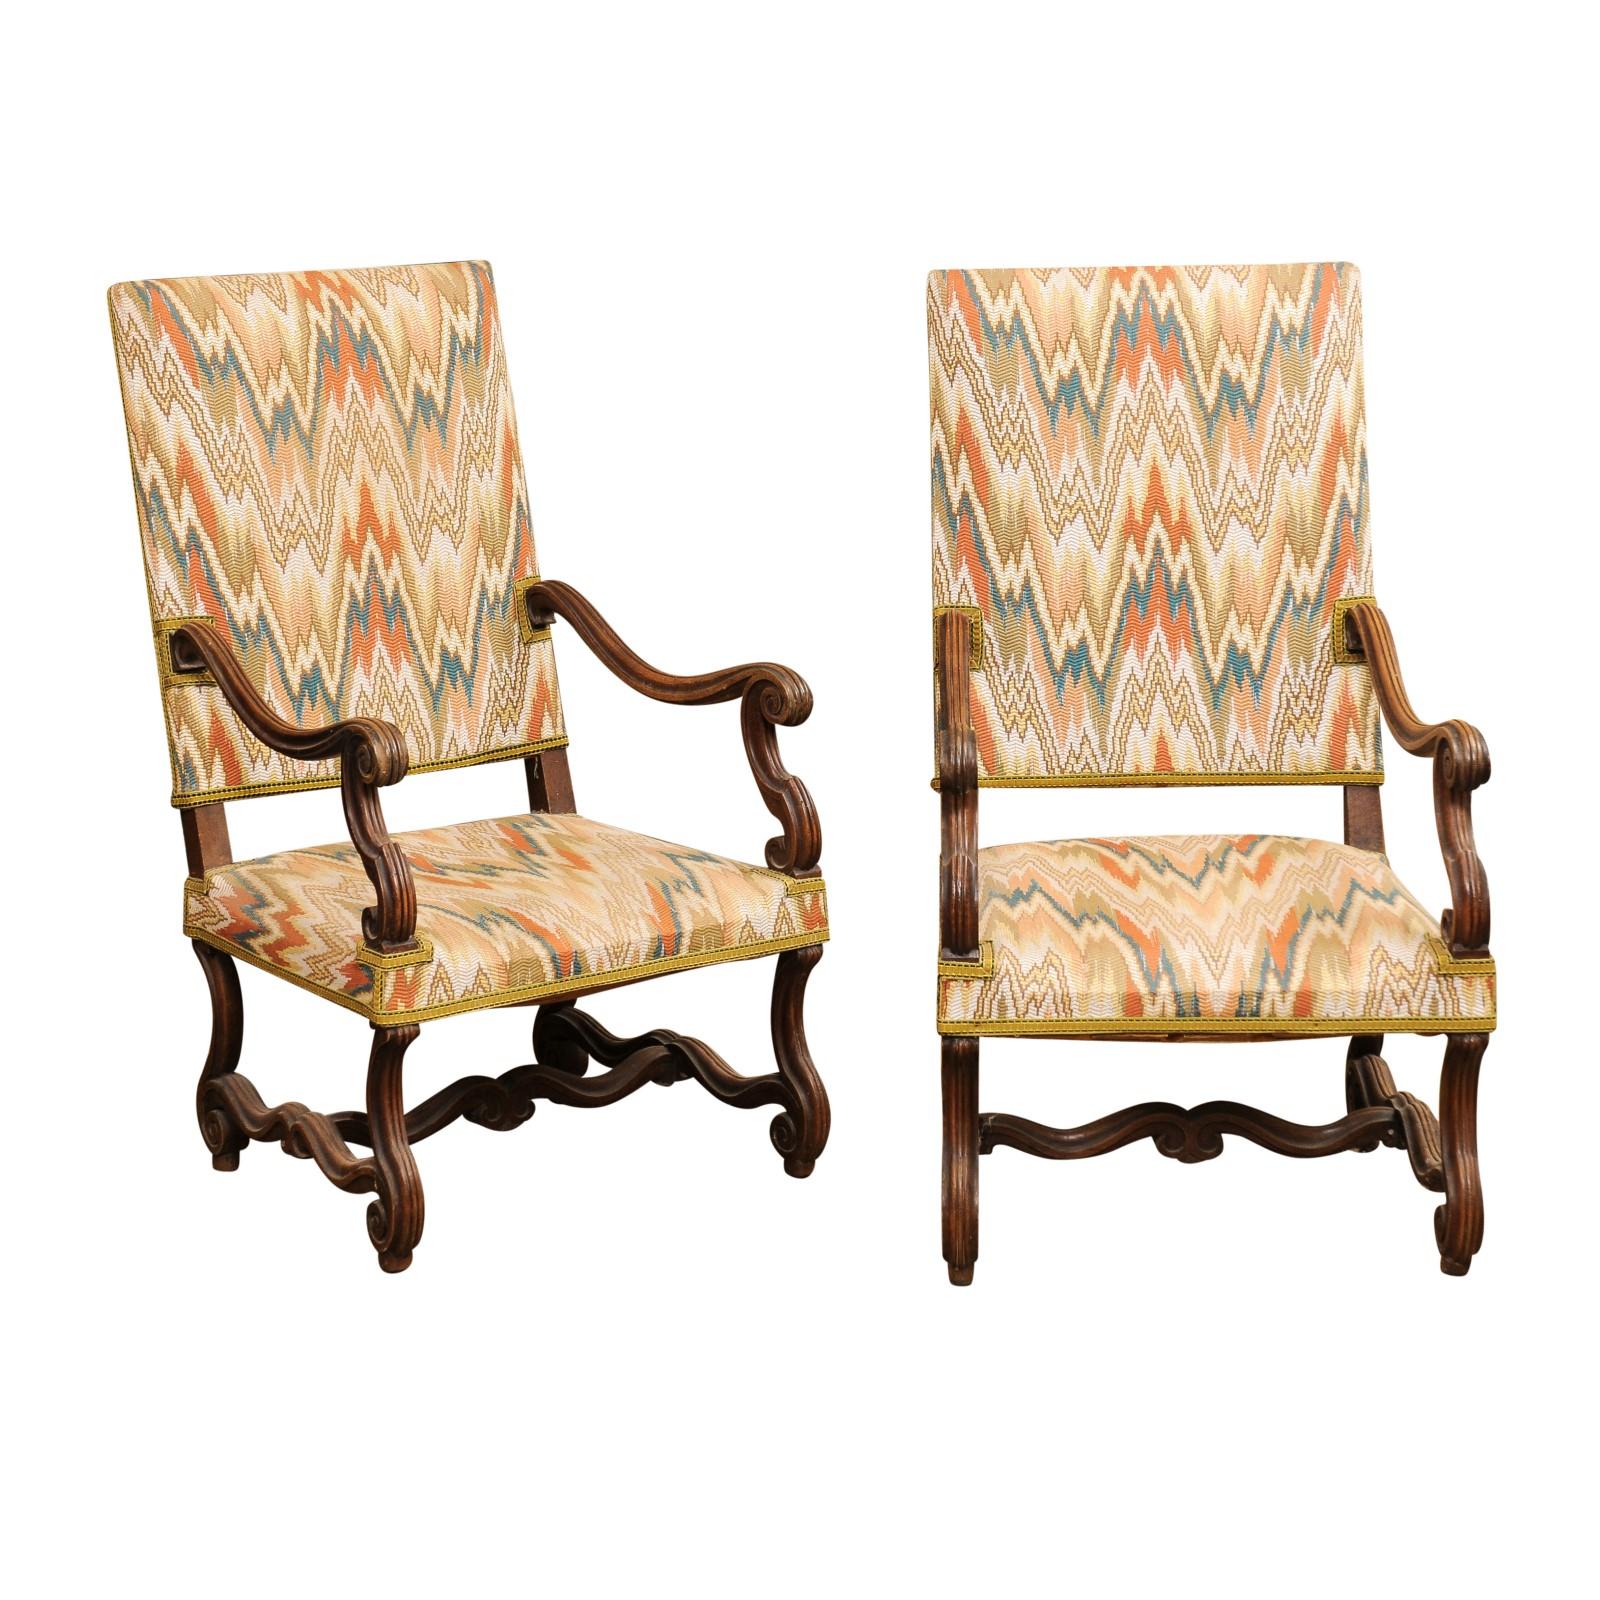 A pair of French Louis XIV style walnut os de mouton fauteuils from the 19th century with rectangular slanted backs, large scrolling arms, scrolling legs, cross stretchers and flame stitch upholstery. Presenting this pair of 19th-century French